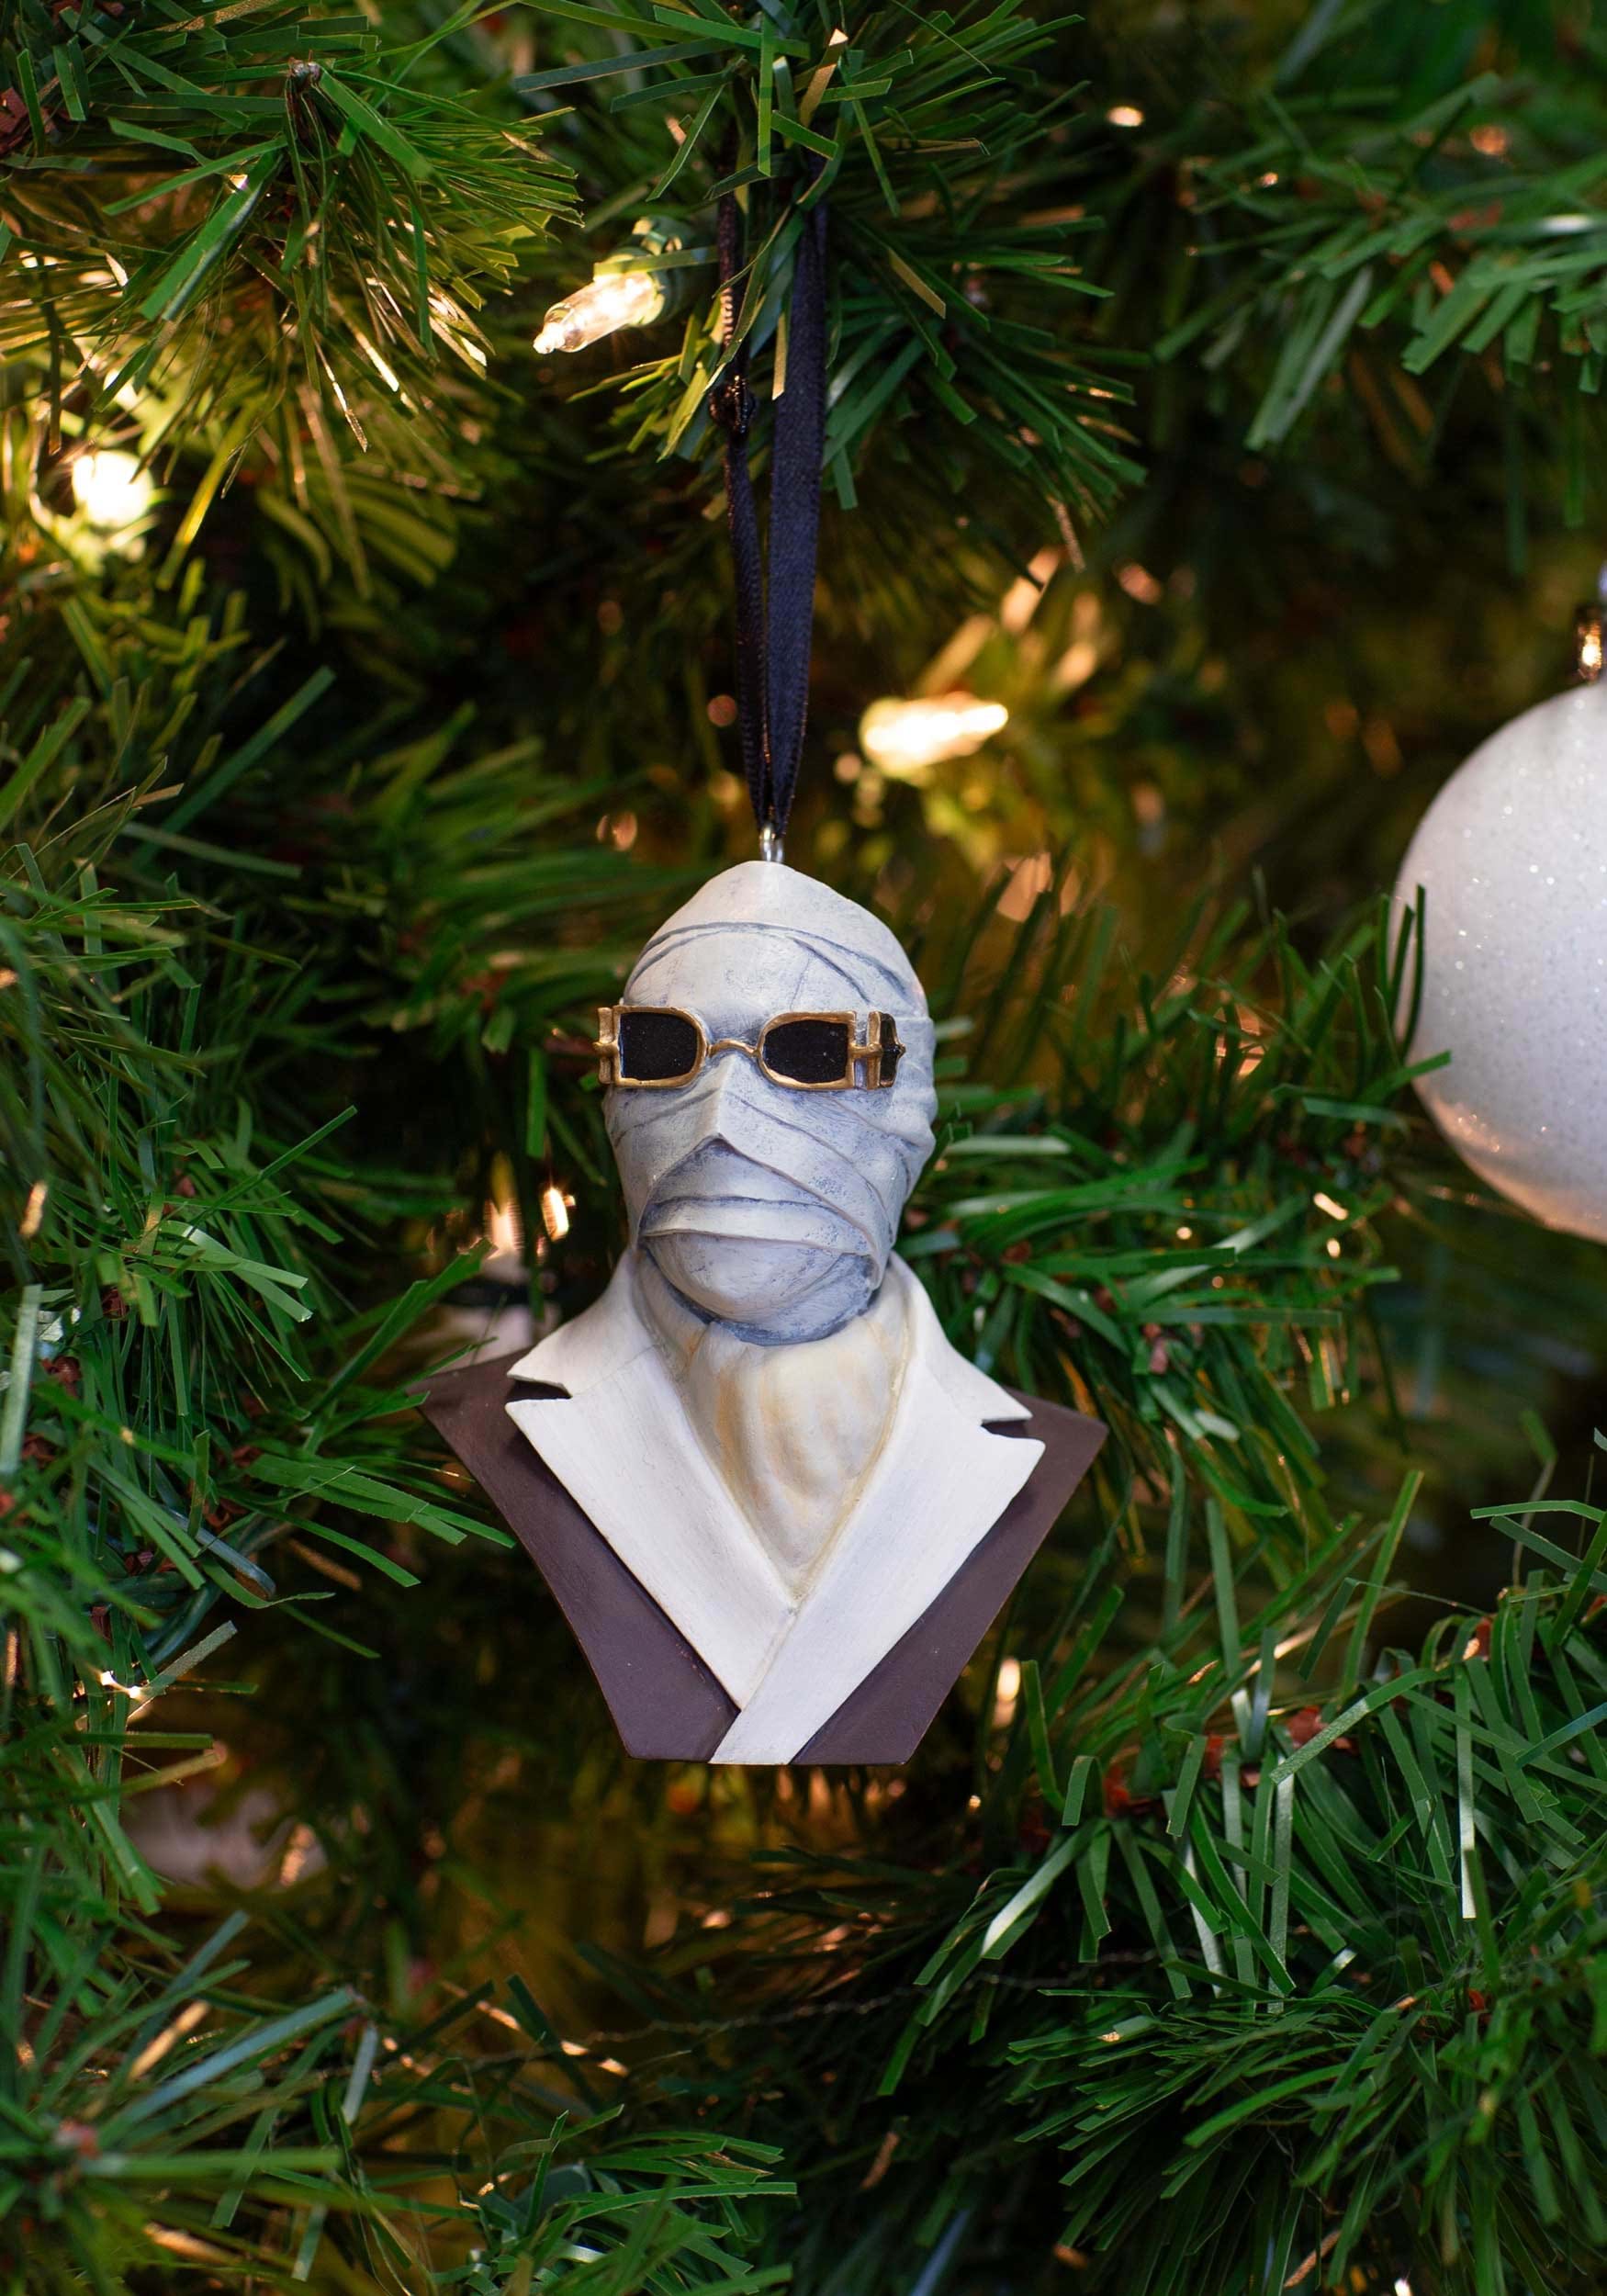 Universal Monsters: The Invisible Man Bust Ornament